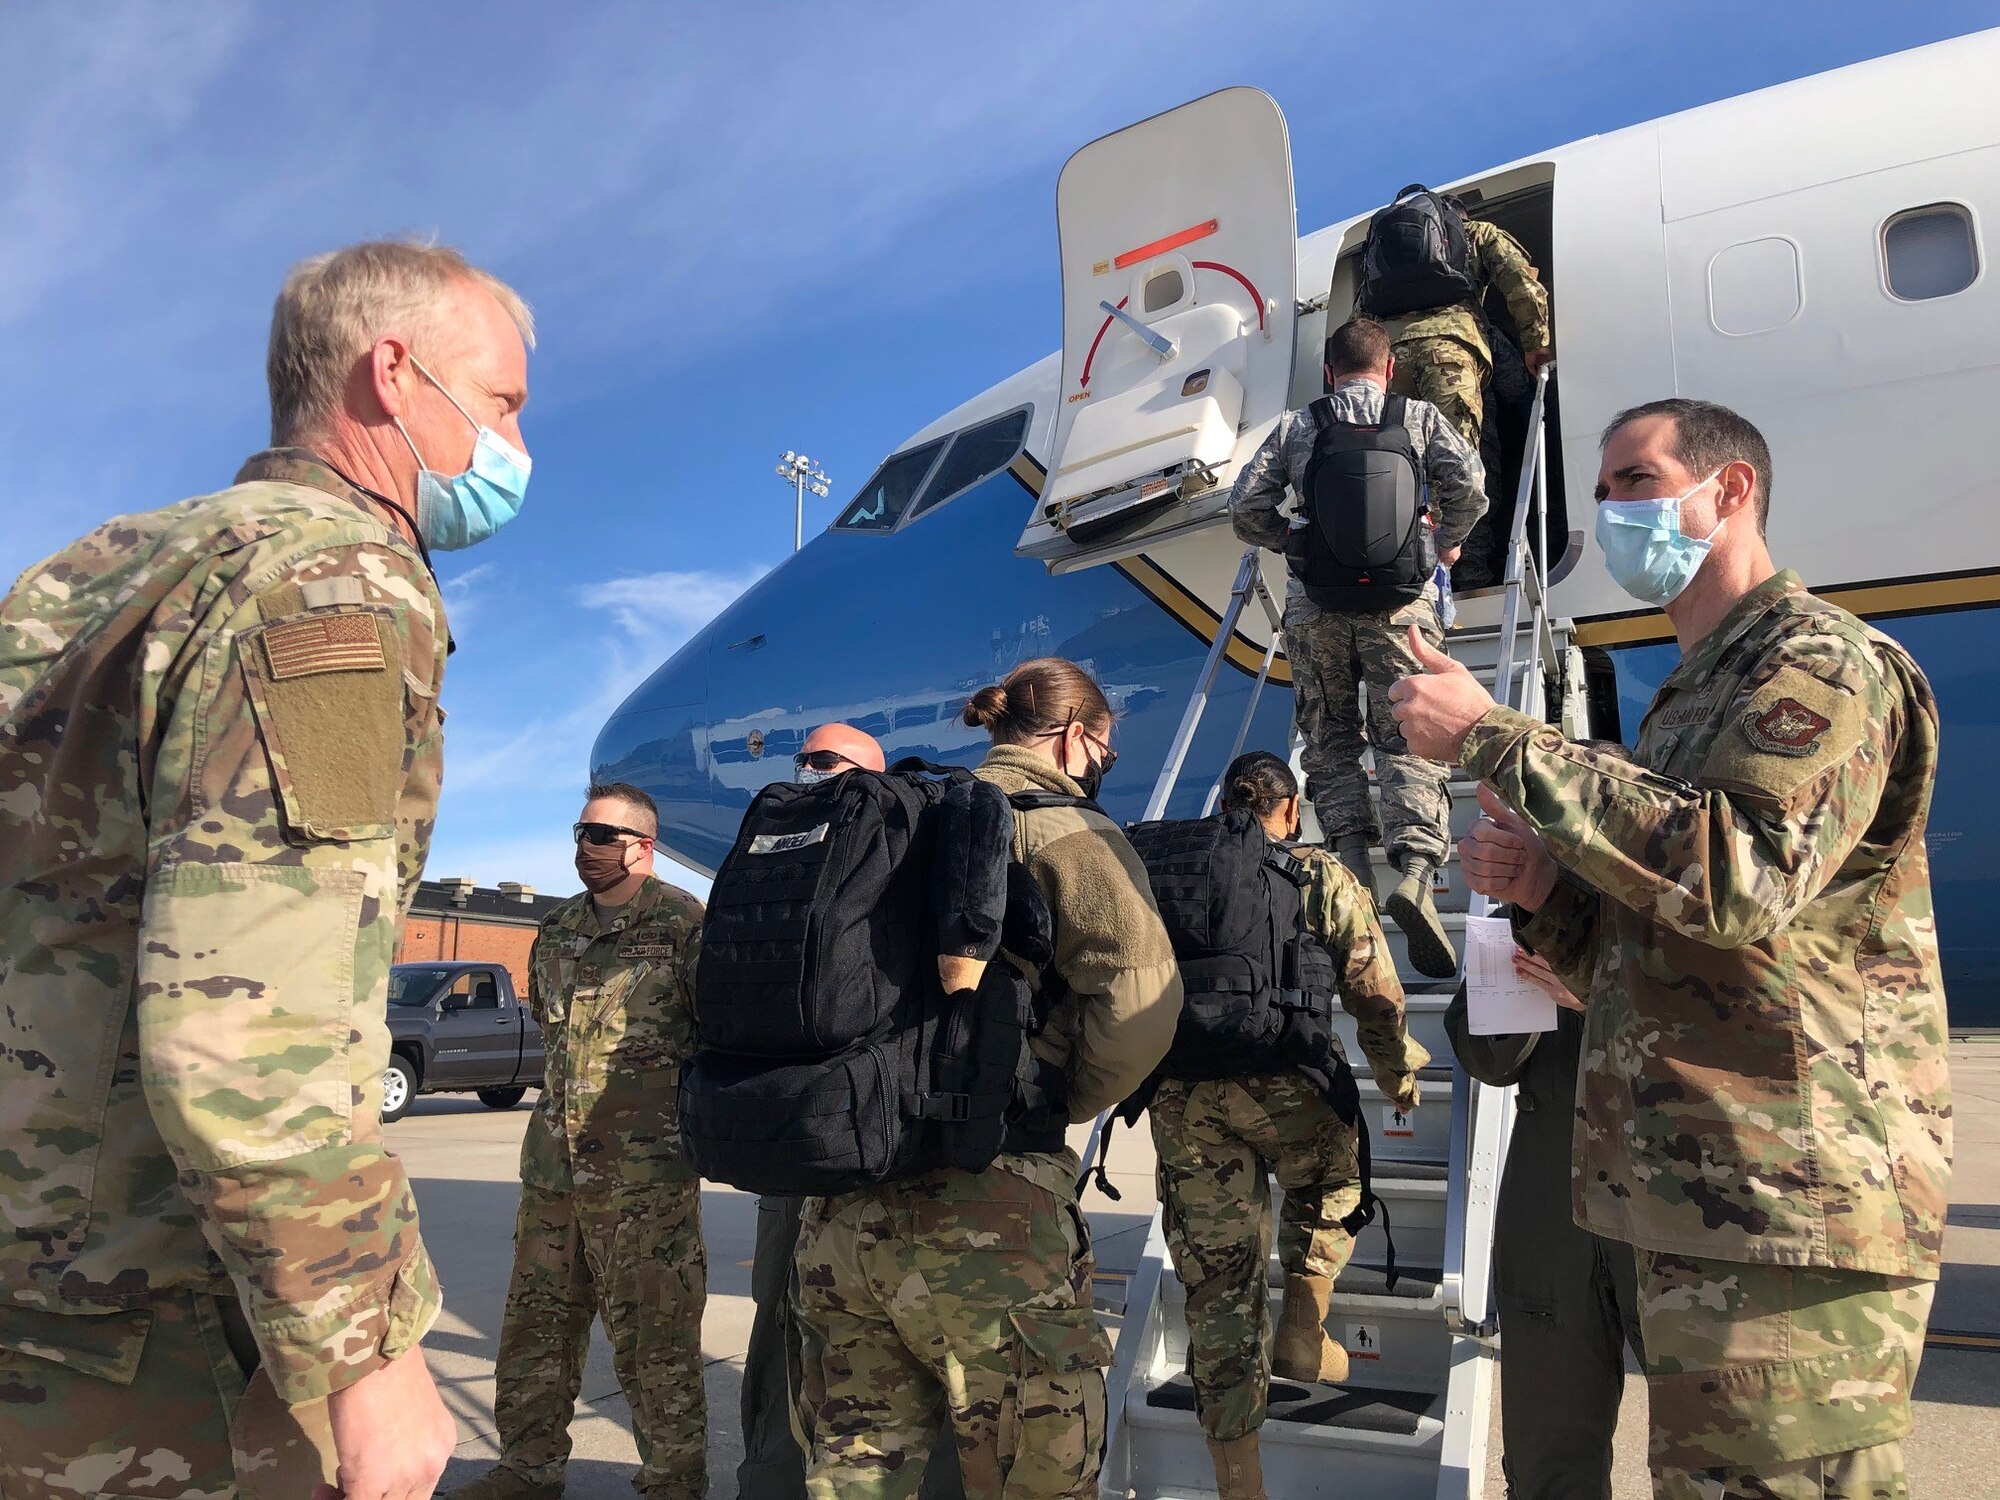 Master Sgt. Blair Bookland (left) and members of the 932nd Medical Group board an 932nd Airlift Wing C-40C, April 22 at Scott Air Force Base, Illinois to support COVID-19 relief efforts in New York. 932nd MDG commander, Col. Chris Spinelli (right) says farewell as they depart. This latest deployment brings the total of Air Force Reservists mobilized in support of COVID-19 relief efforts to more than 770 around the nation. (U.S. Air Force photo by Lt. Col. Stan Paregien)